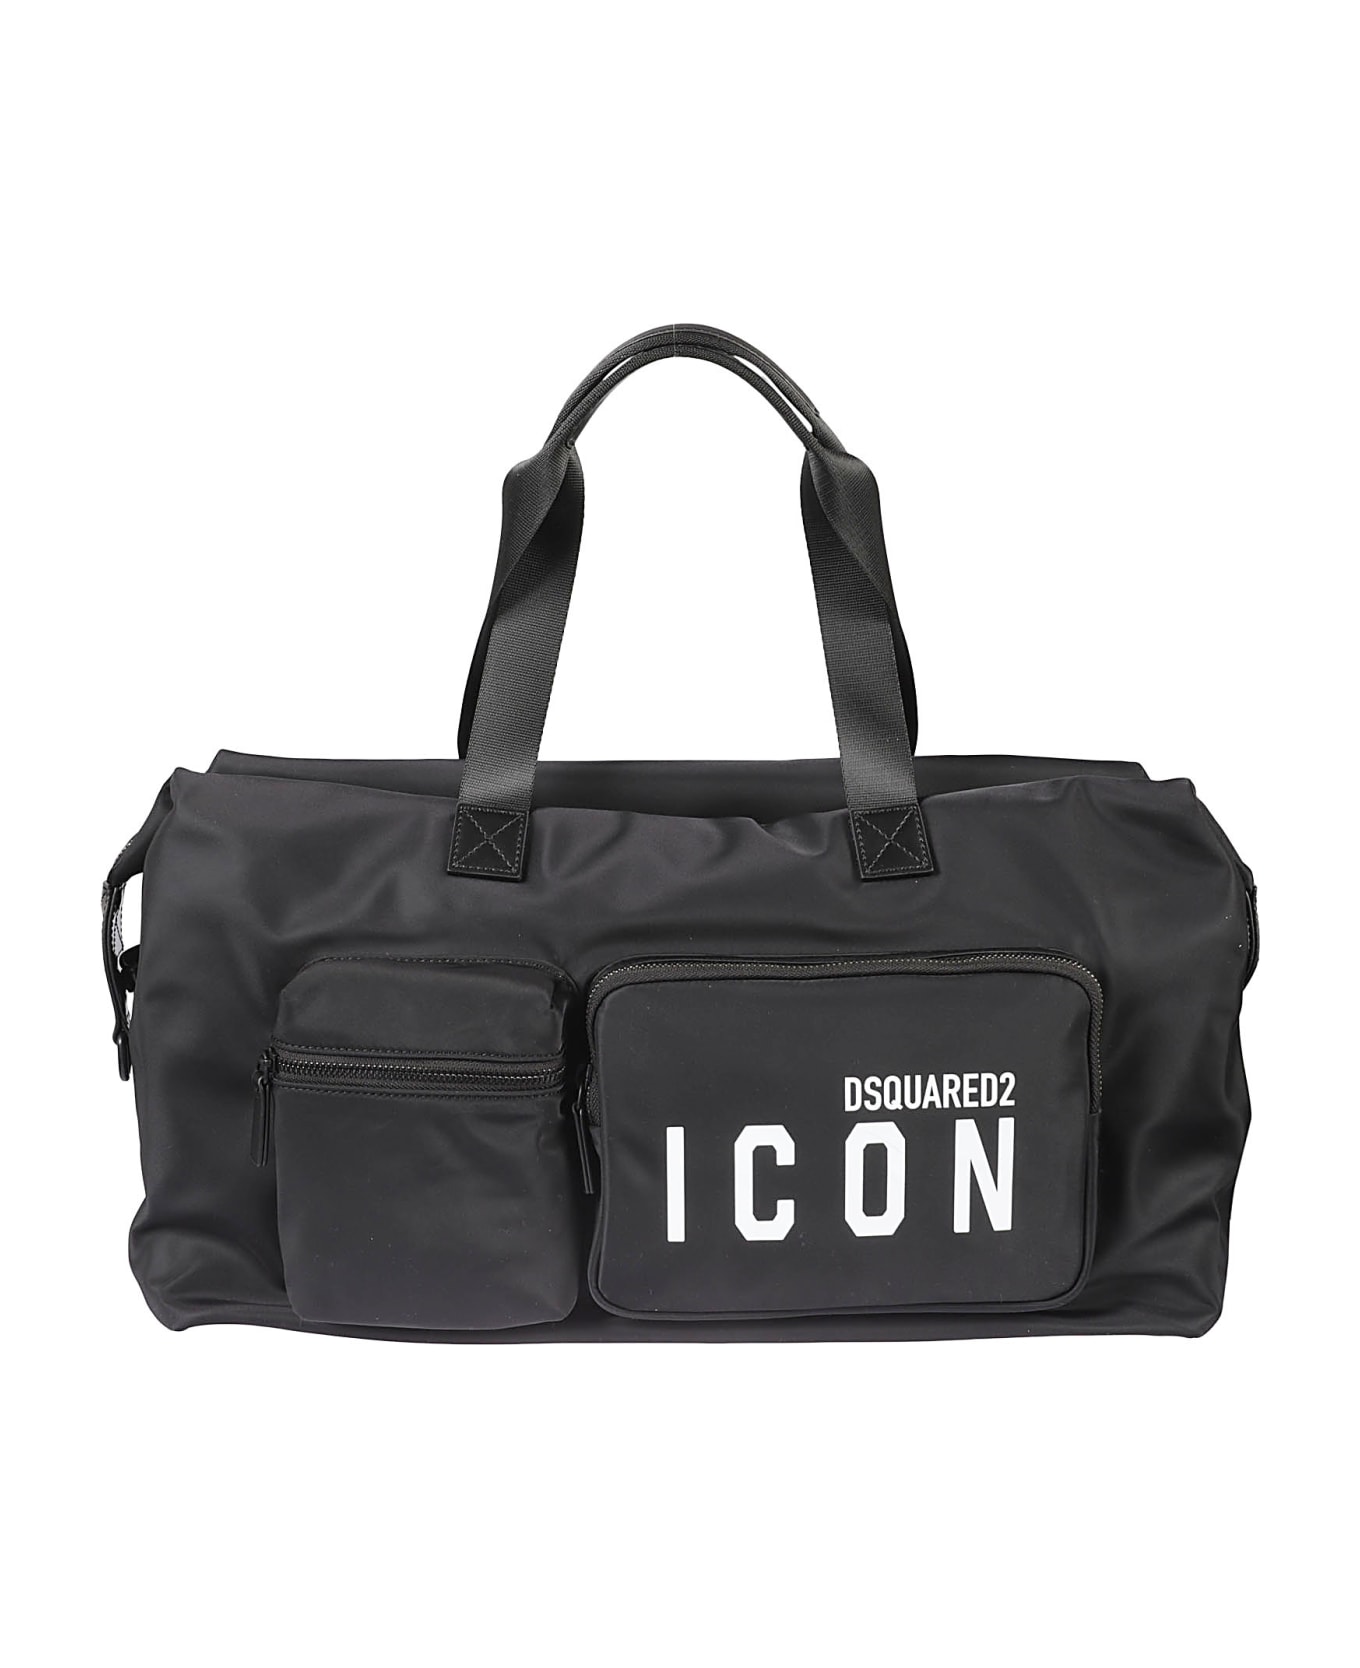 Dsquared2 Icon Leather Duffle Bag - Black